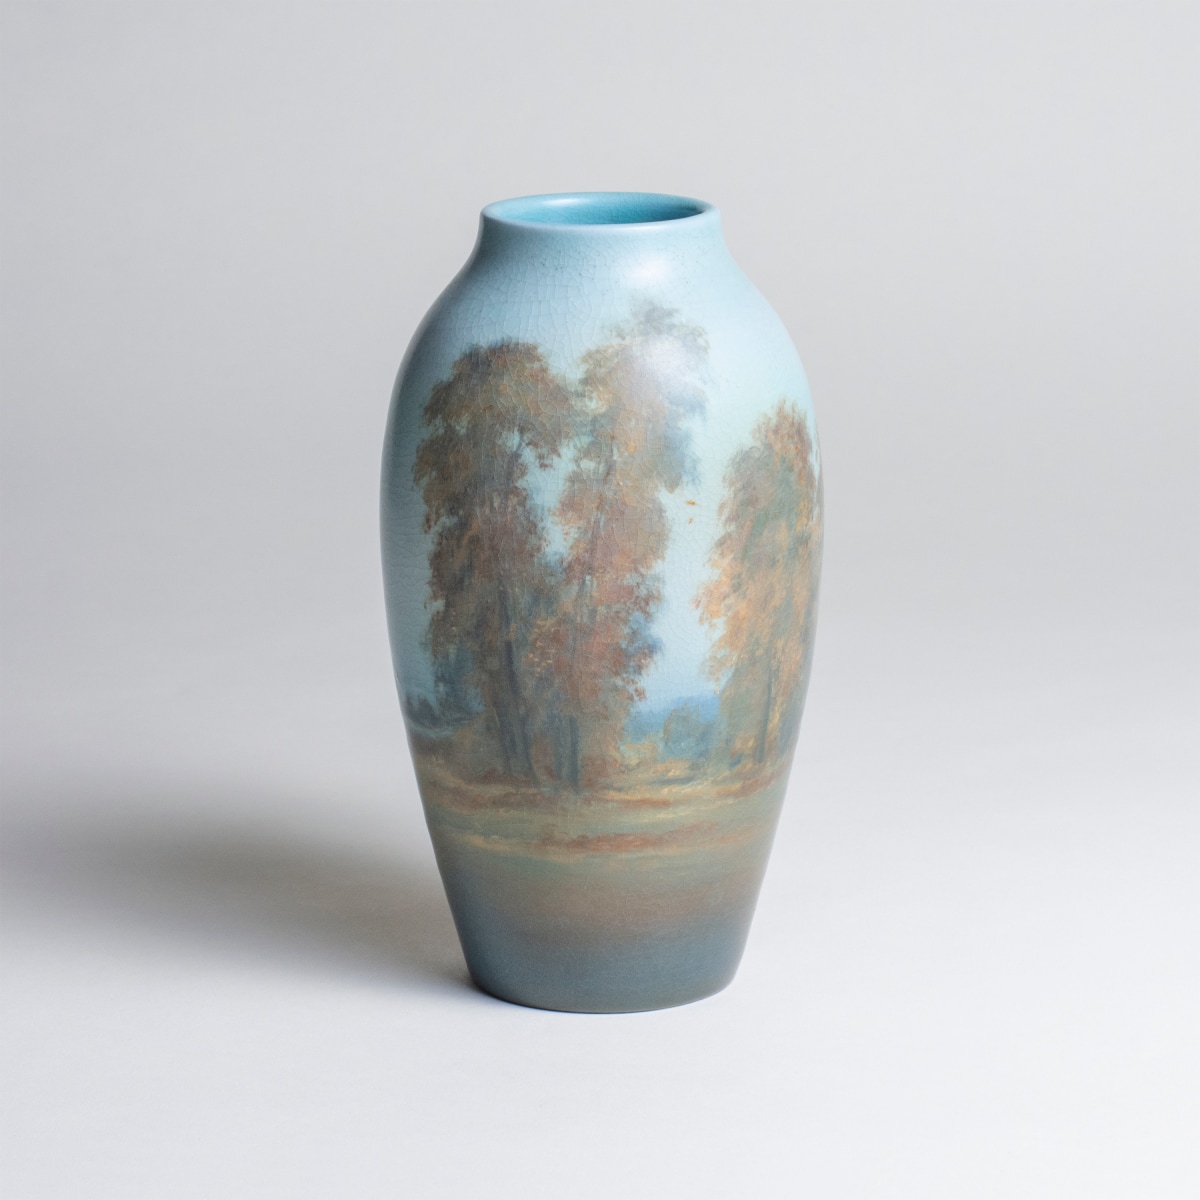 a landscape vase of the ohio river or american landscape by rookwood pottery artist ed diers, showing a fall scene with trees in autumn foliage with snow capped mountains in the distance, in the hazy scenic vellum glaze